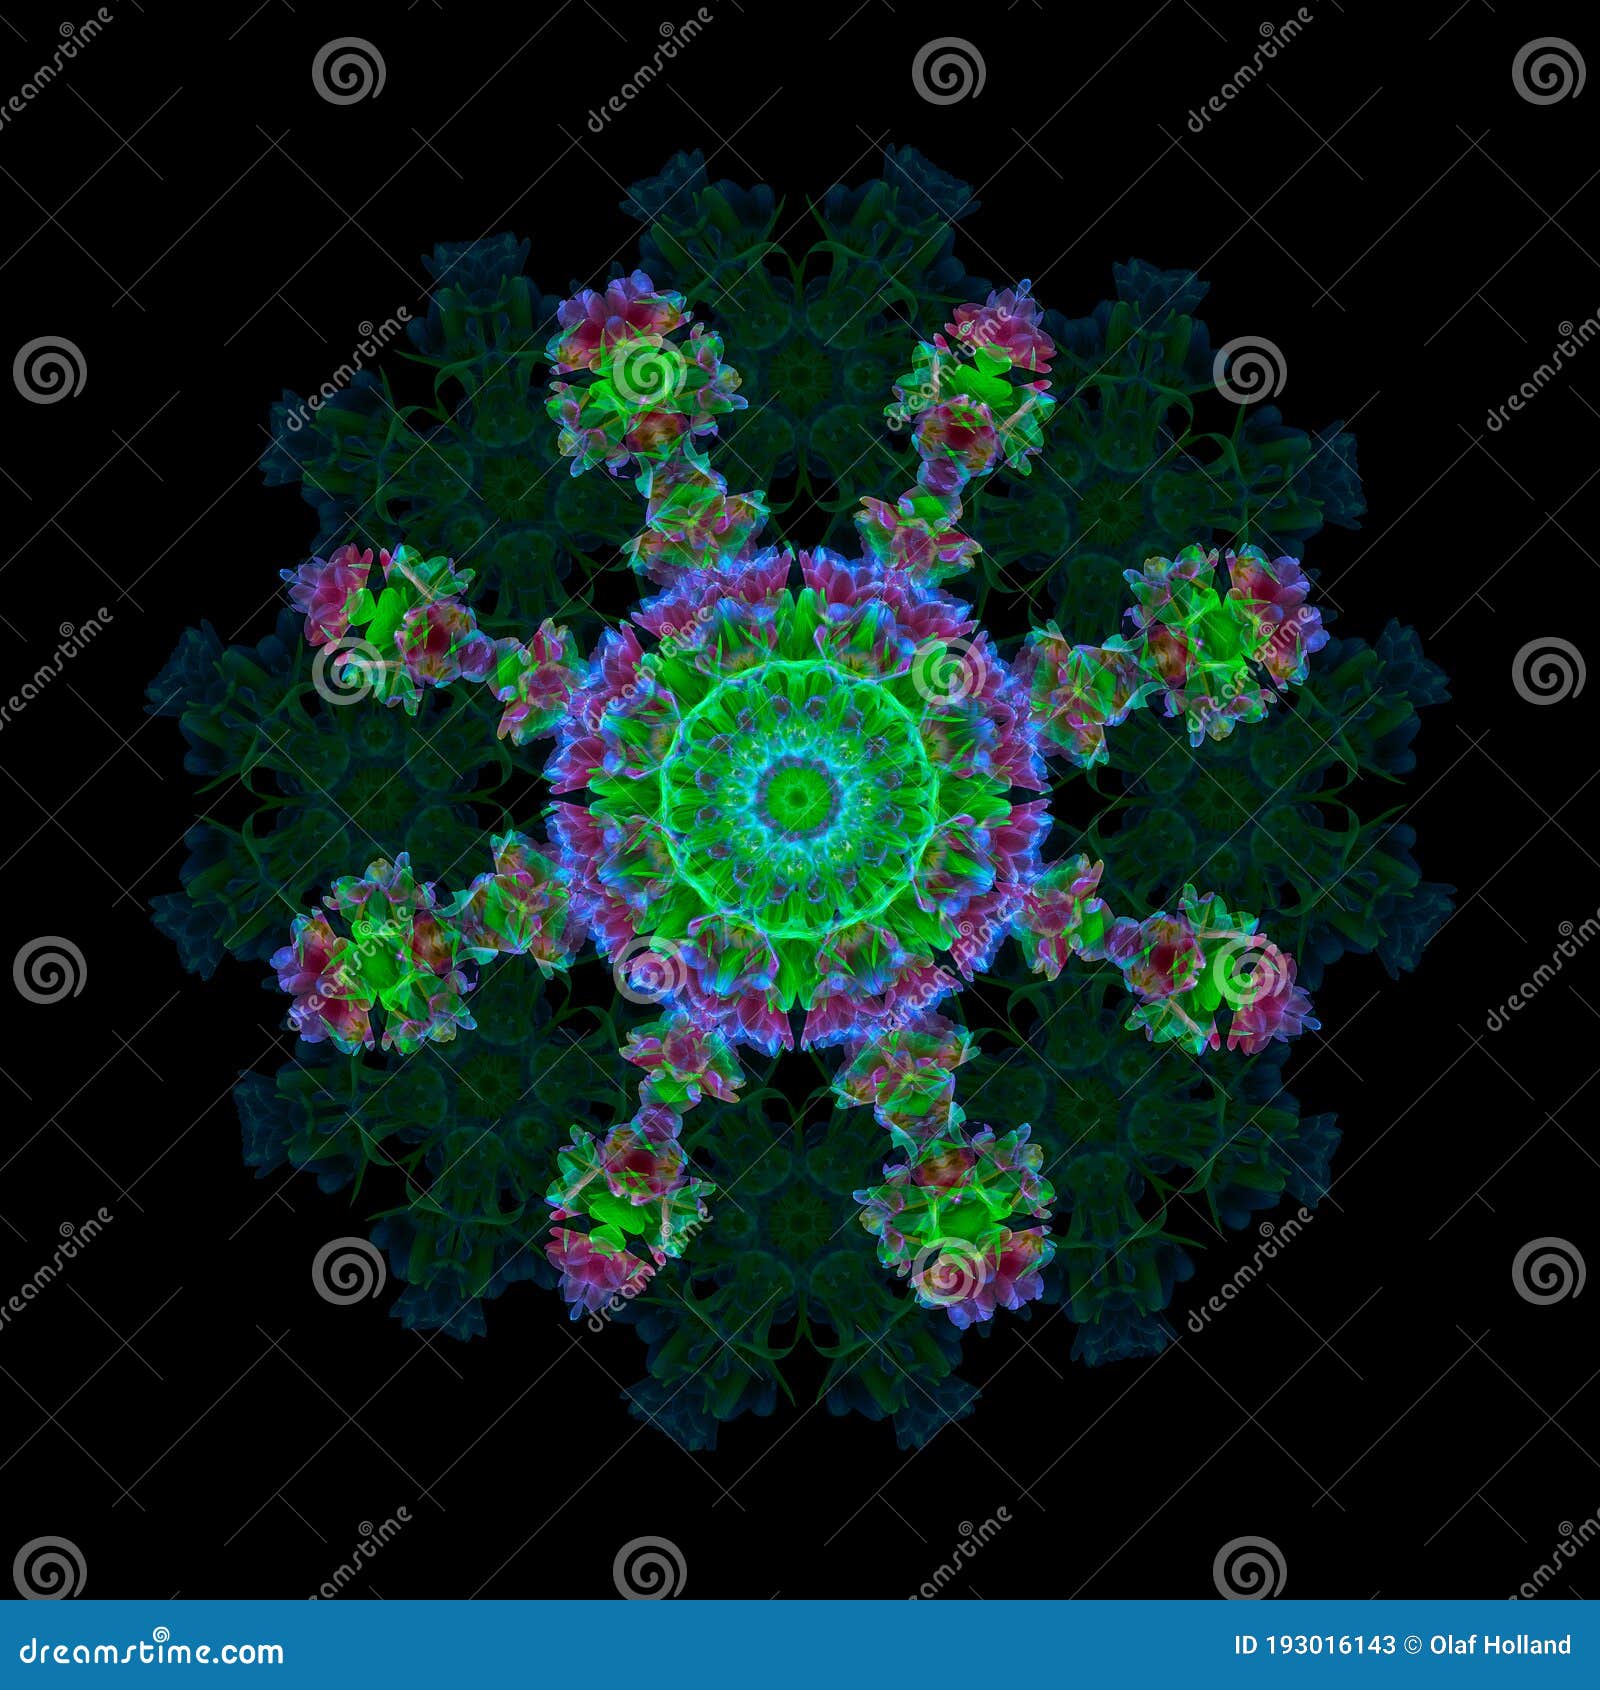 geometrical symmetrical baroque color pattern made from macros of red blue green tulips